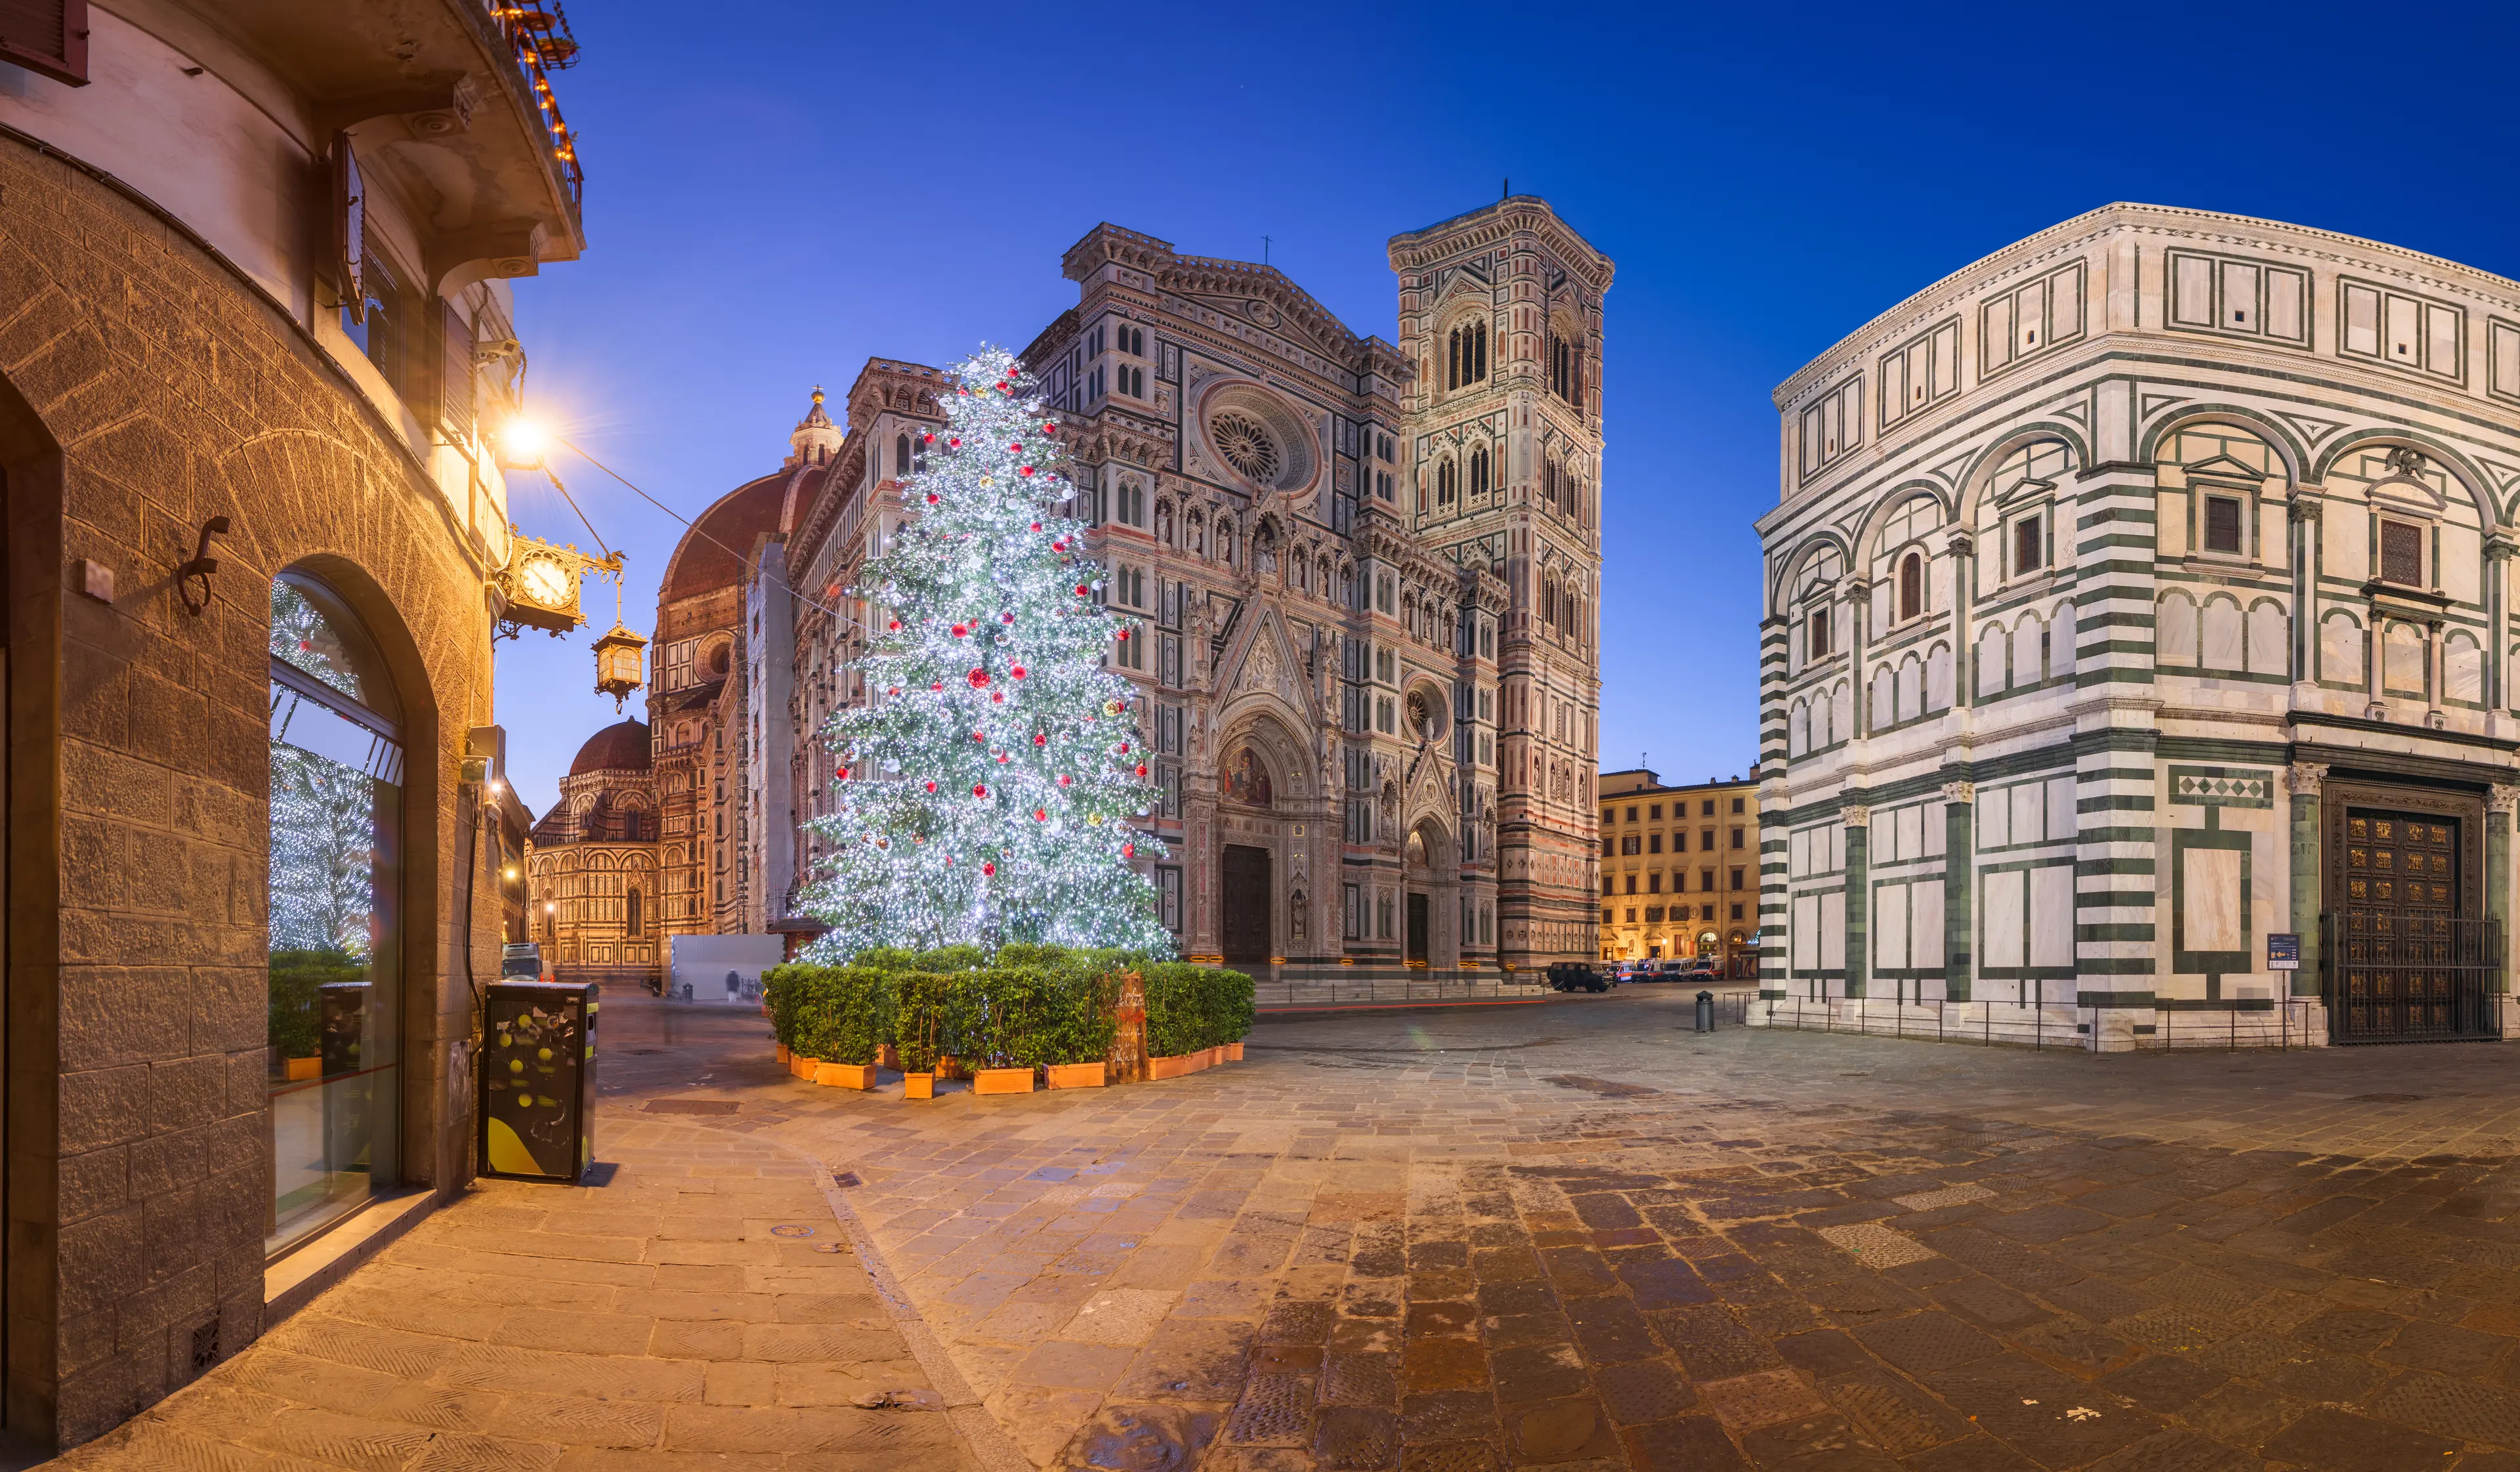 3-Day Romantic Christmas Holiday Itinerary in Florence, Italy